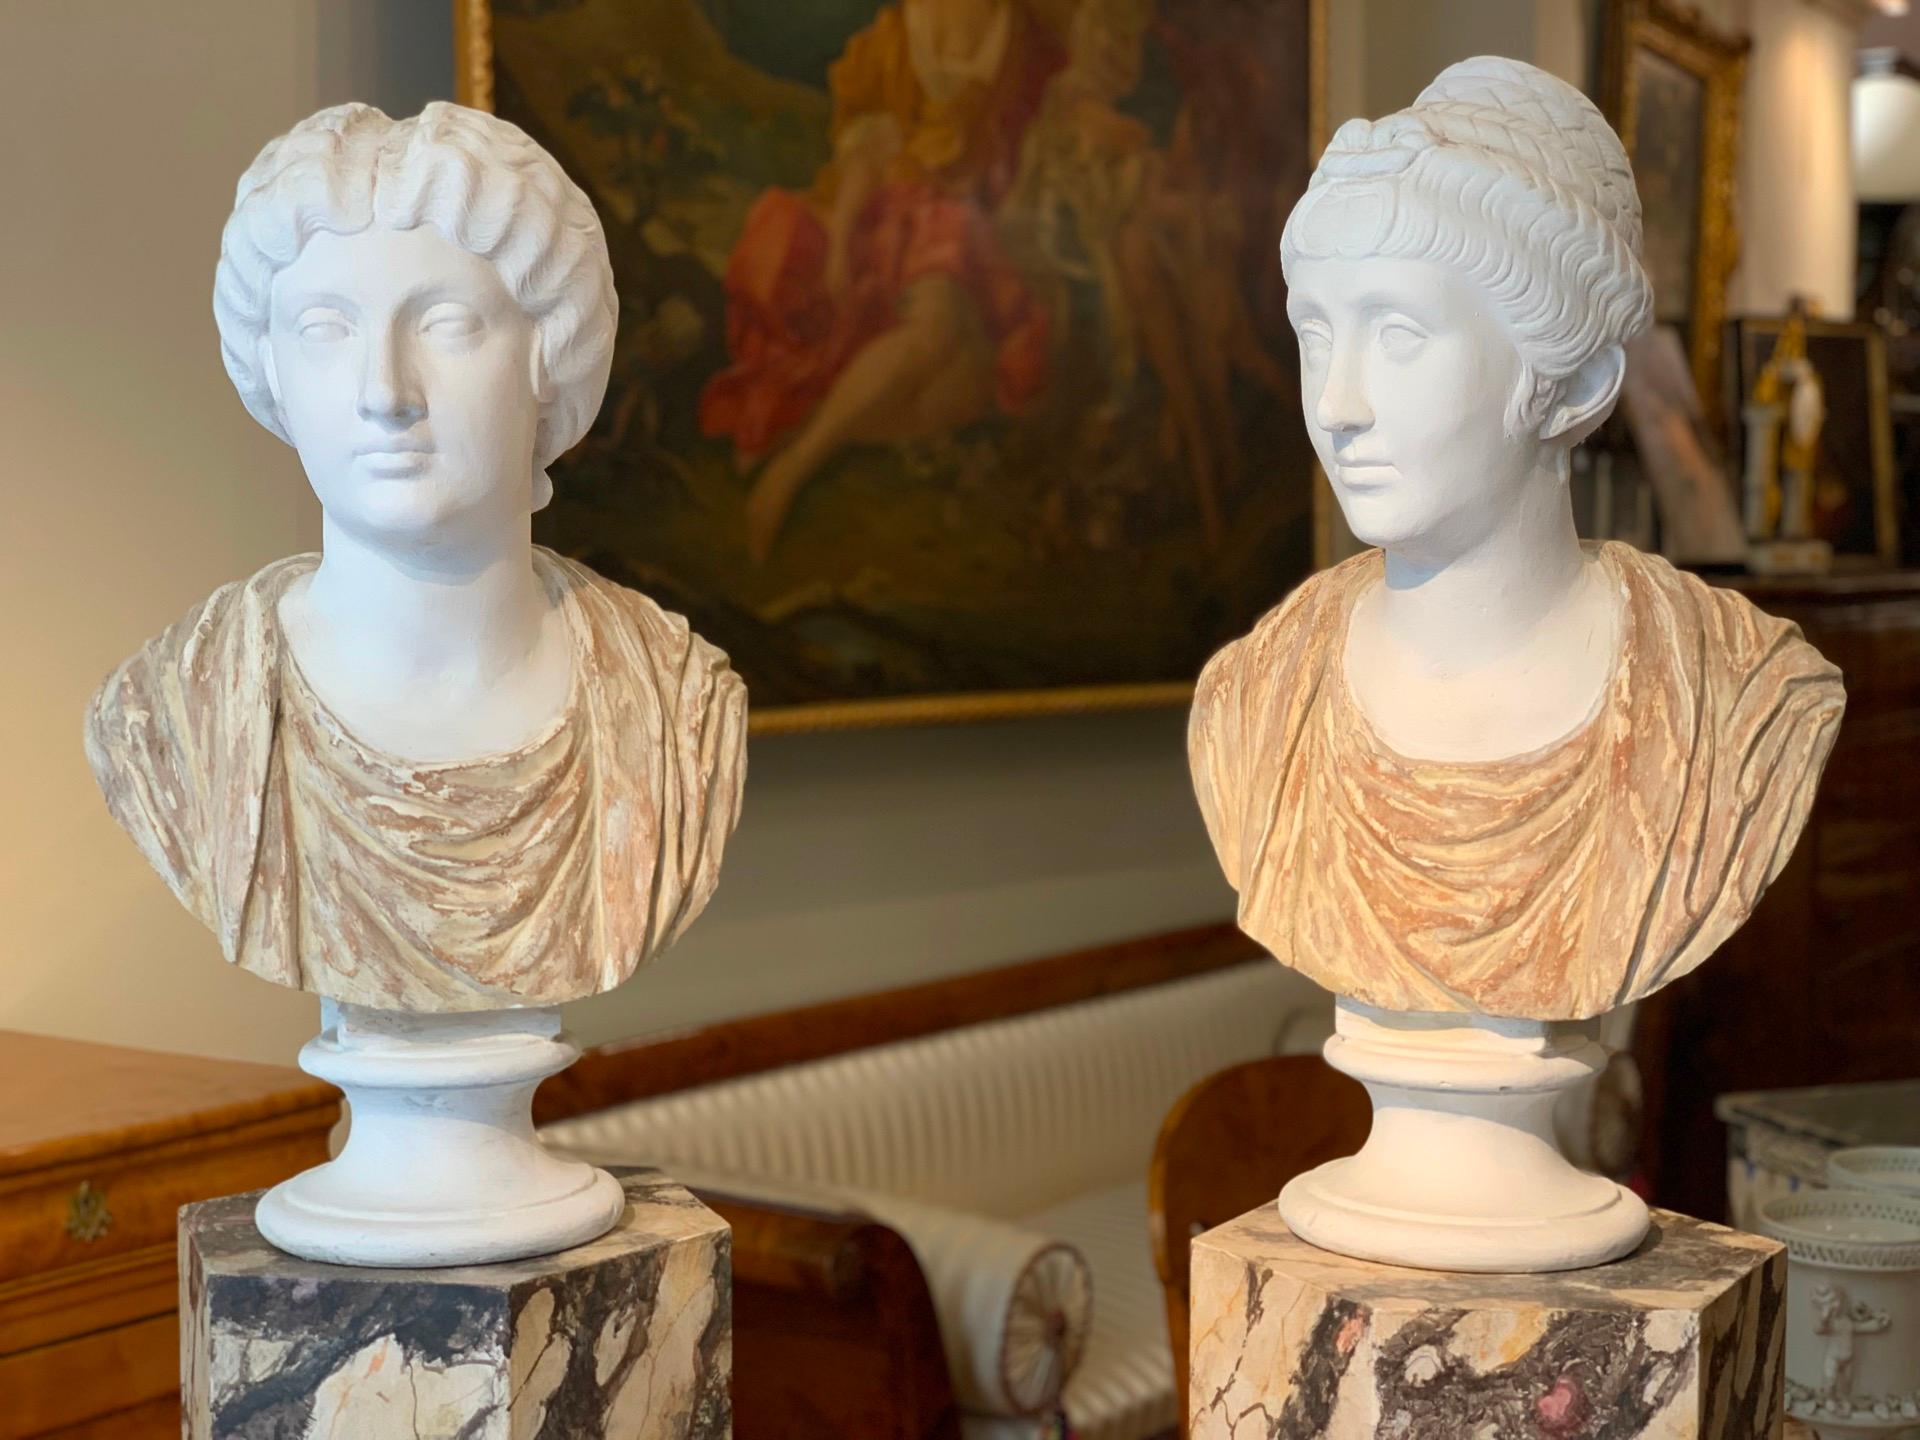 Italian 19th CENTURY PAIR OF NEOCLASSICAL BUSTS IN TERRACOTTA AND PLASTER